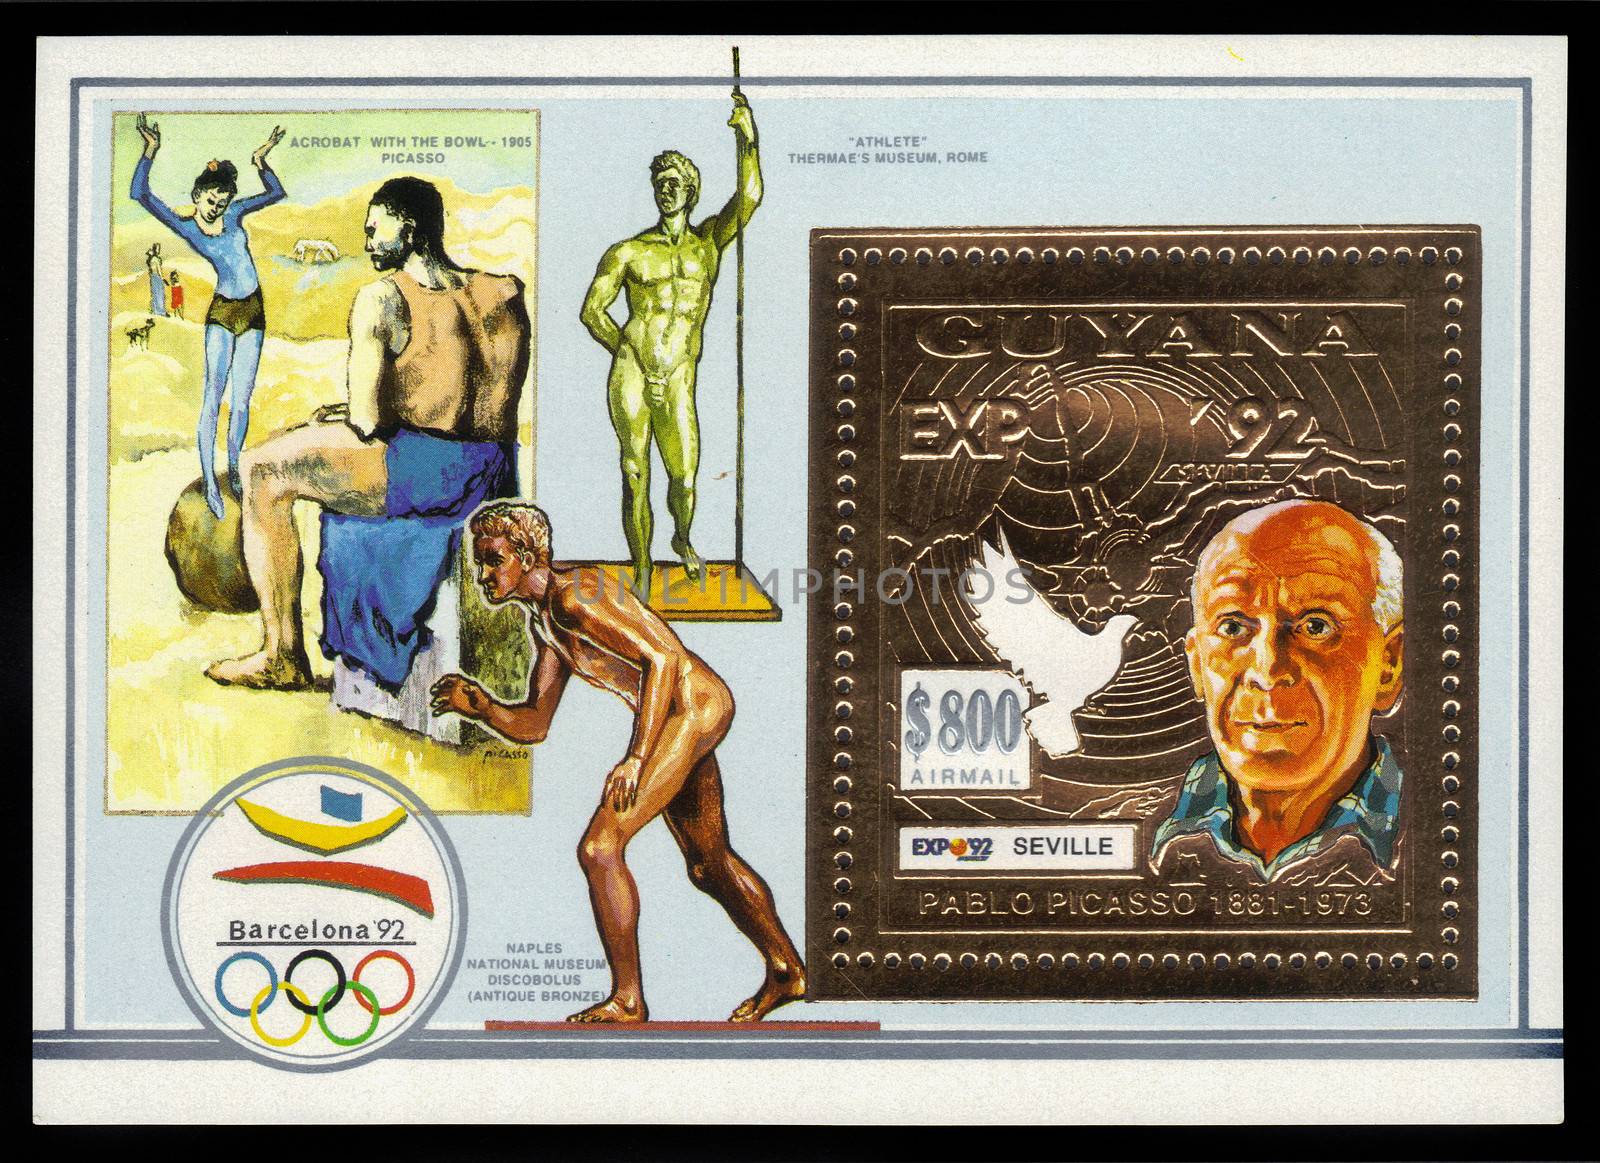 GUAYANA - CIRCA 1992: A stamp printed in Guyana shows portrait of Pablo Picasso on the background of world-famous works of art, in honor of the Olympic Games in Barcelona, circa 1992